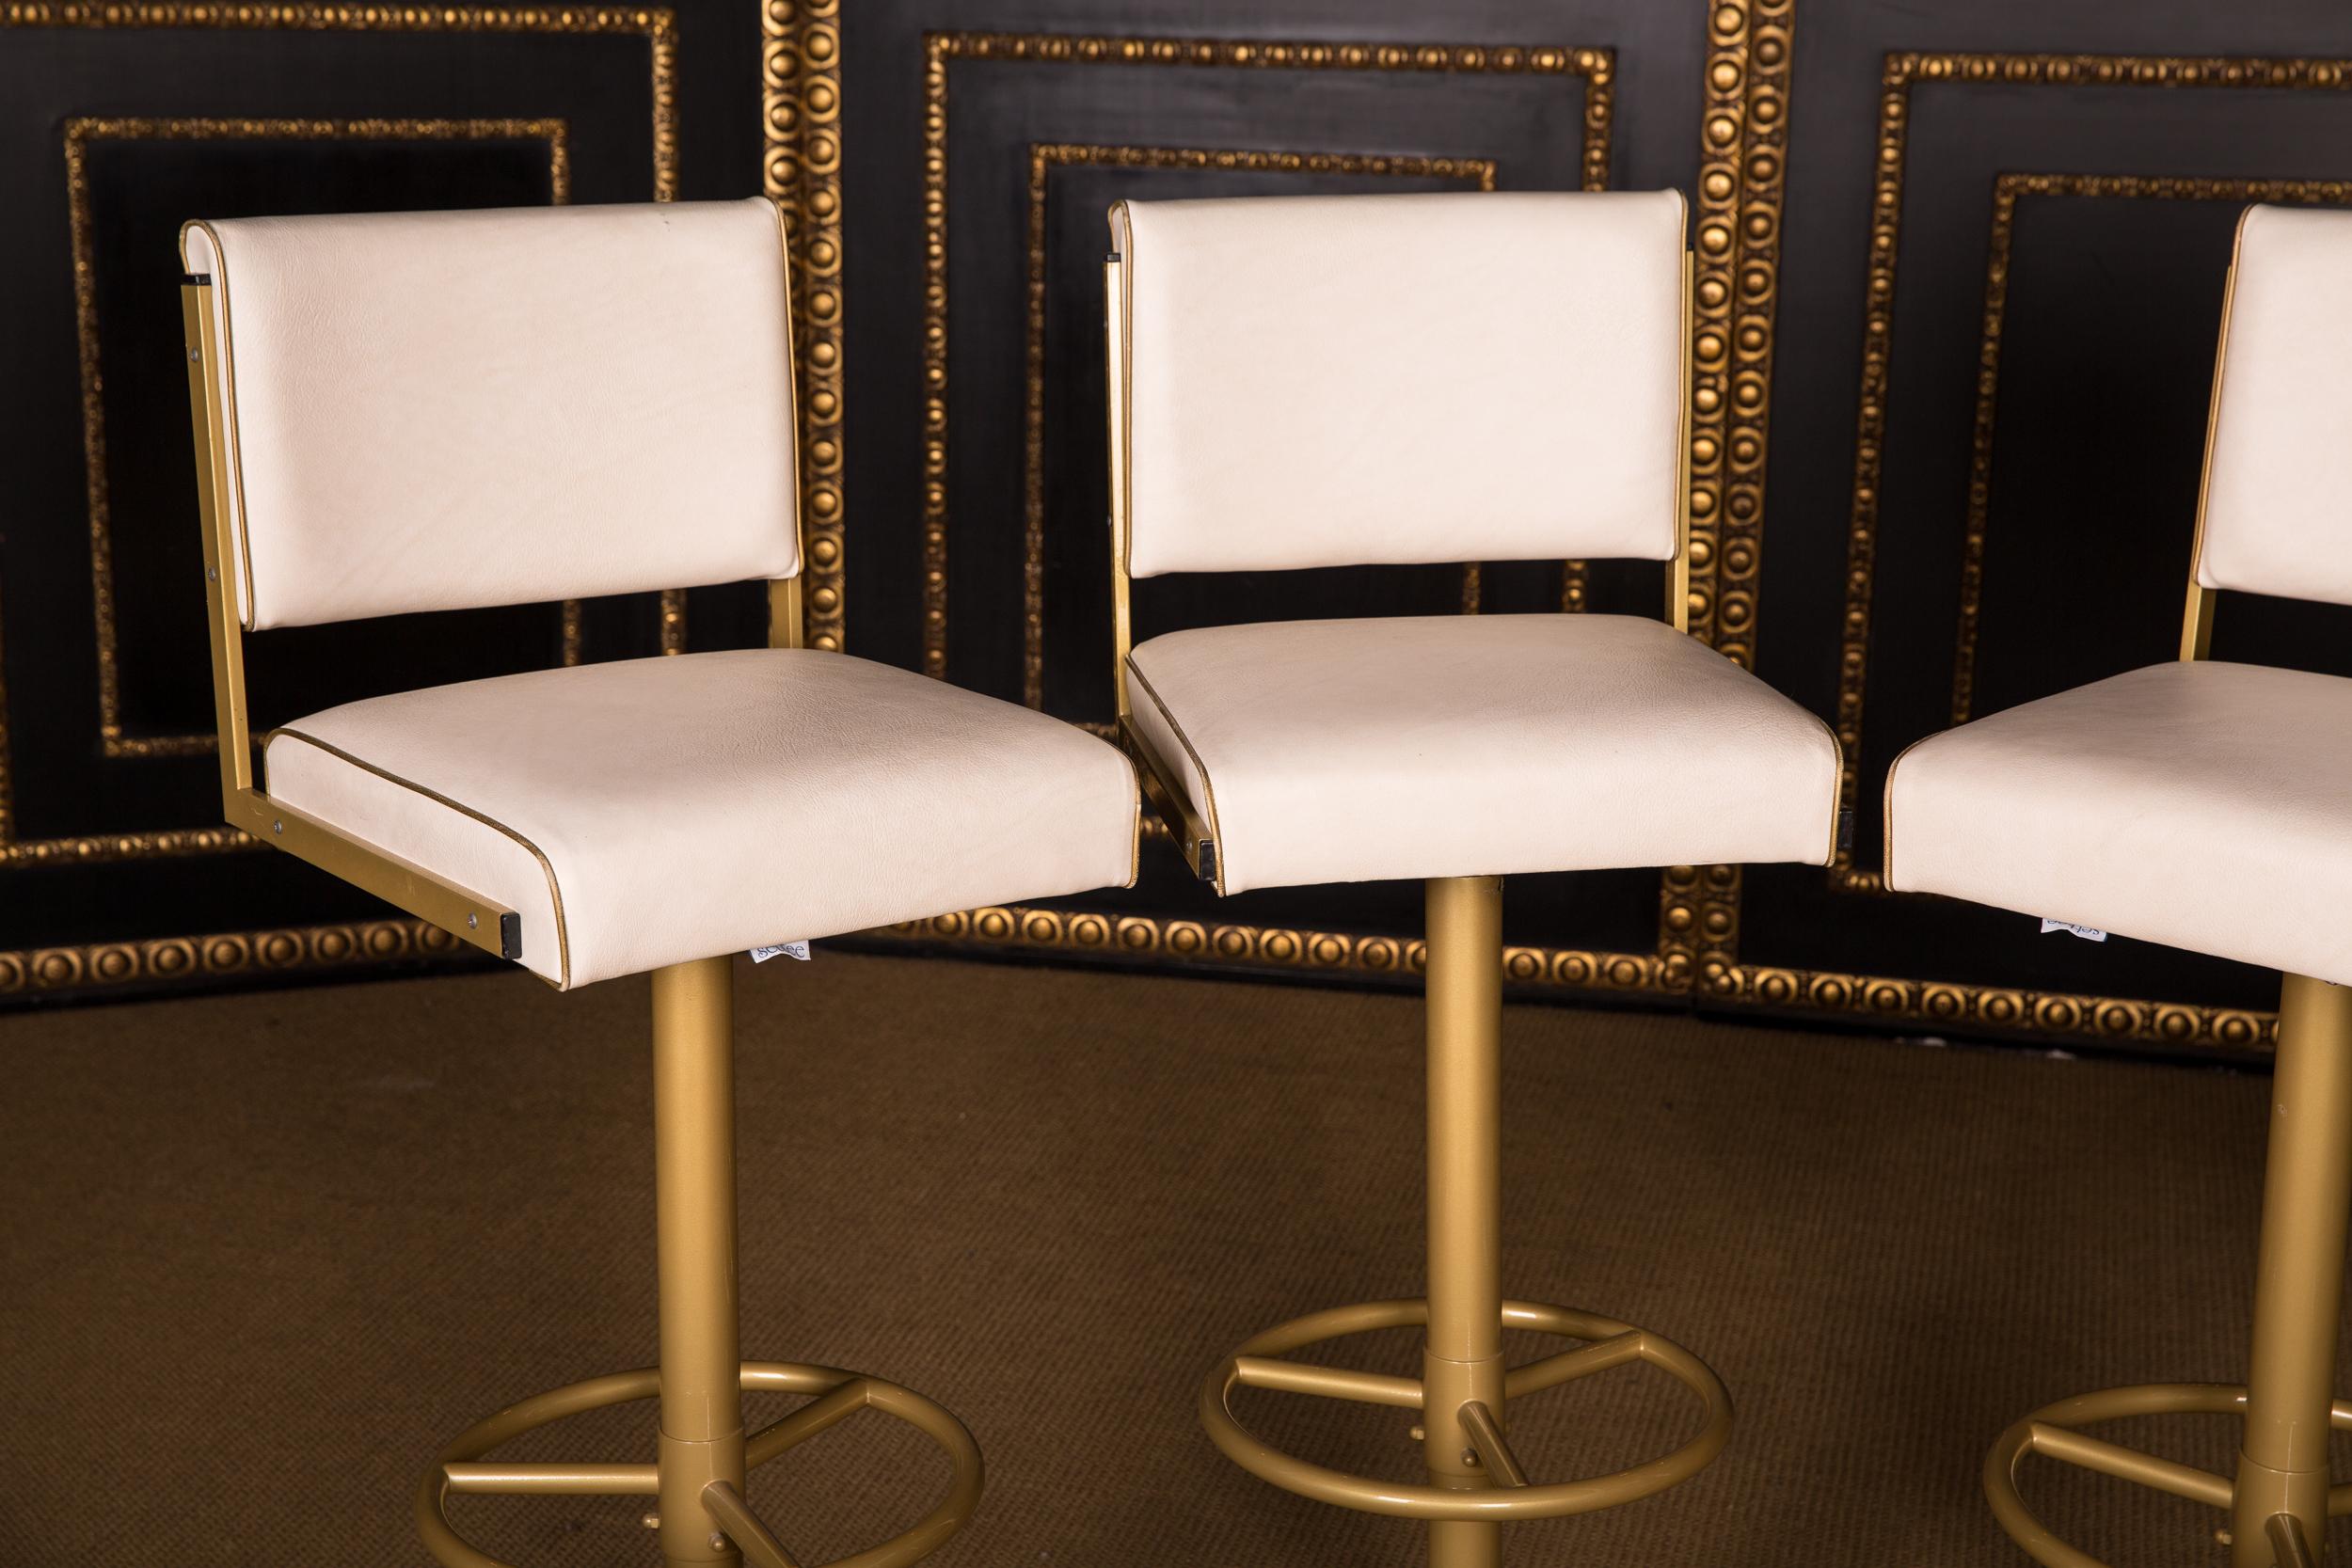 Four heavy, sturdy stools with footrest. The frame is set in gold and the seat is upholstered in leather.
This chairs are not new,its used but in a good condition 